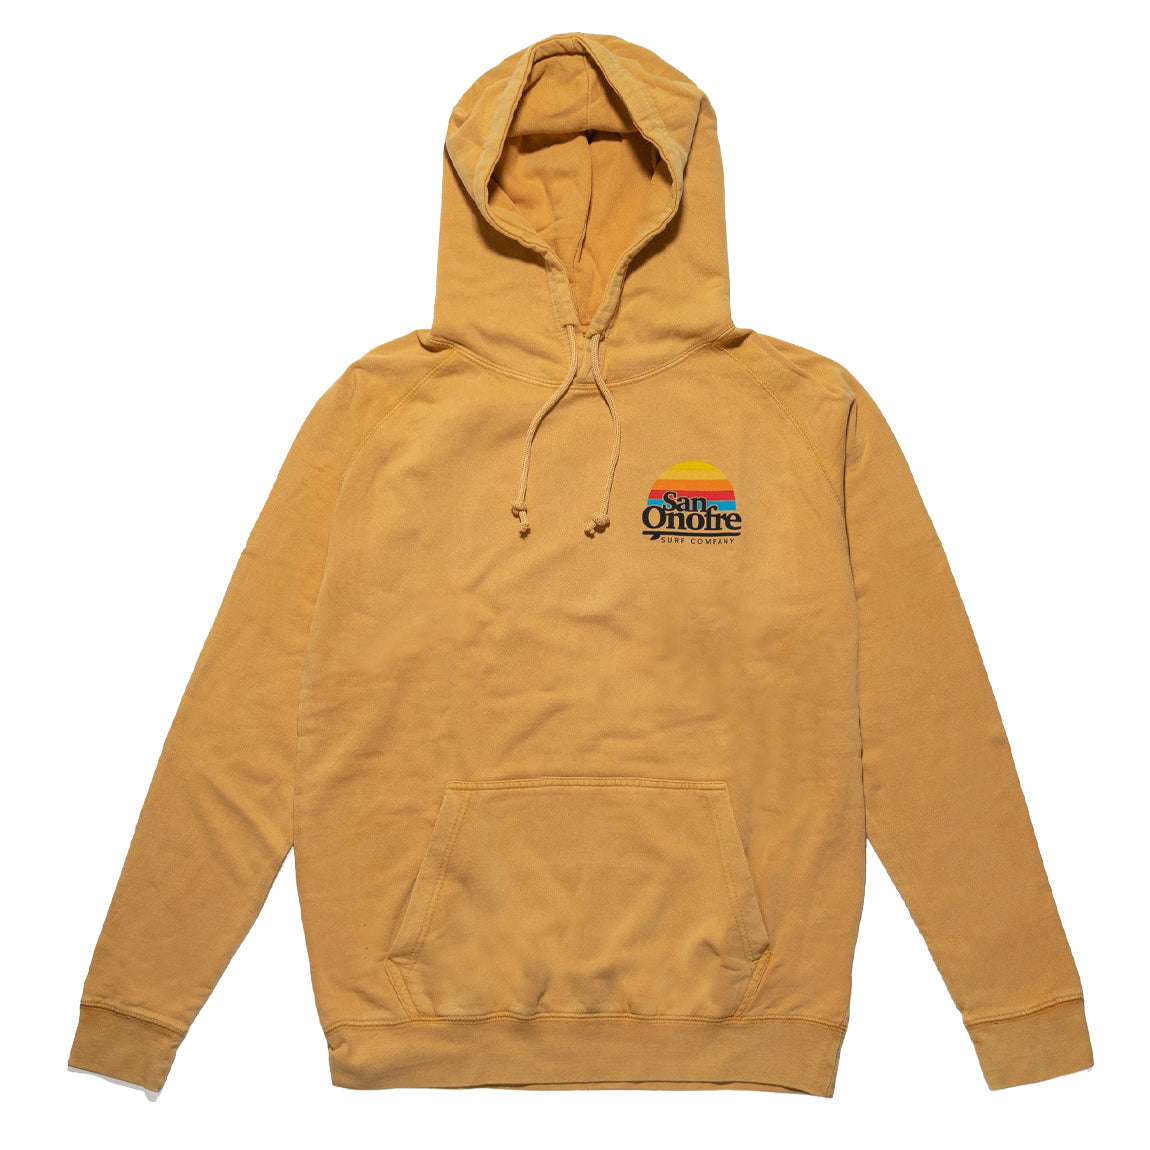 SAN ONOFRE SURF CO. OLD SCHOOL SUN HOODIE VINTAGE YELLOW